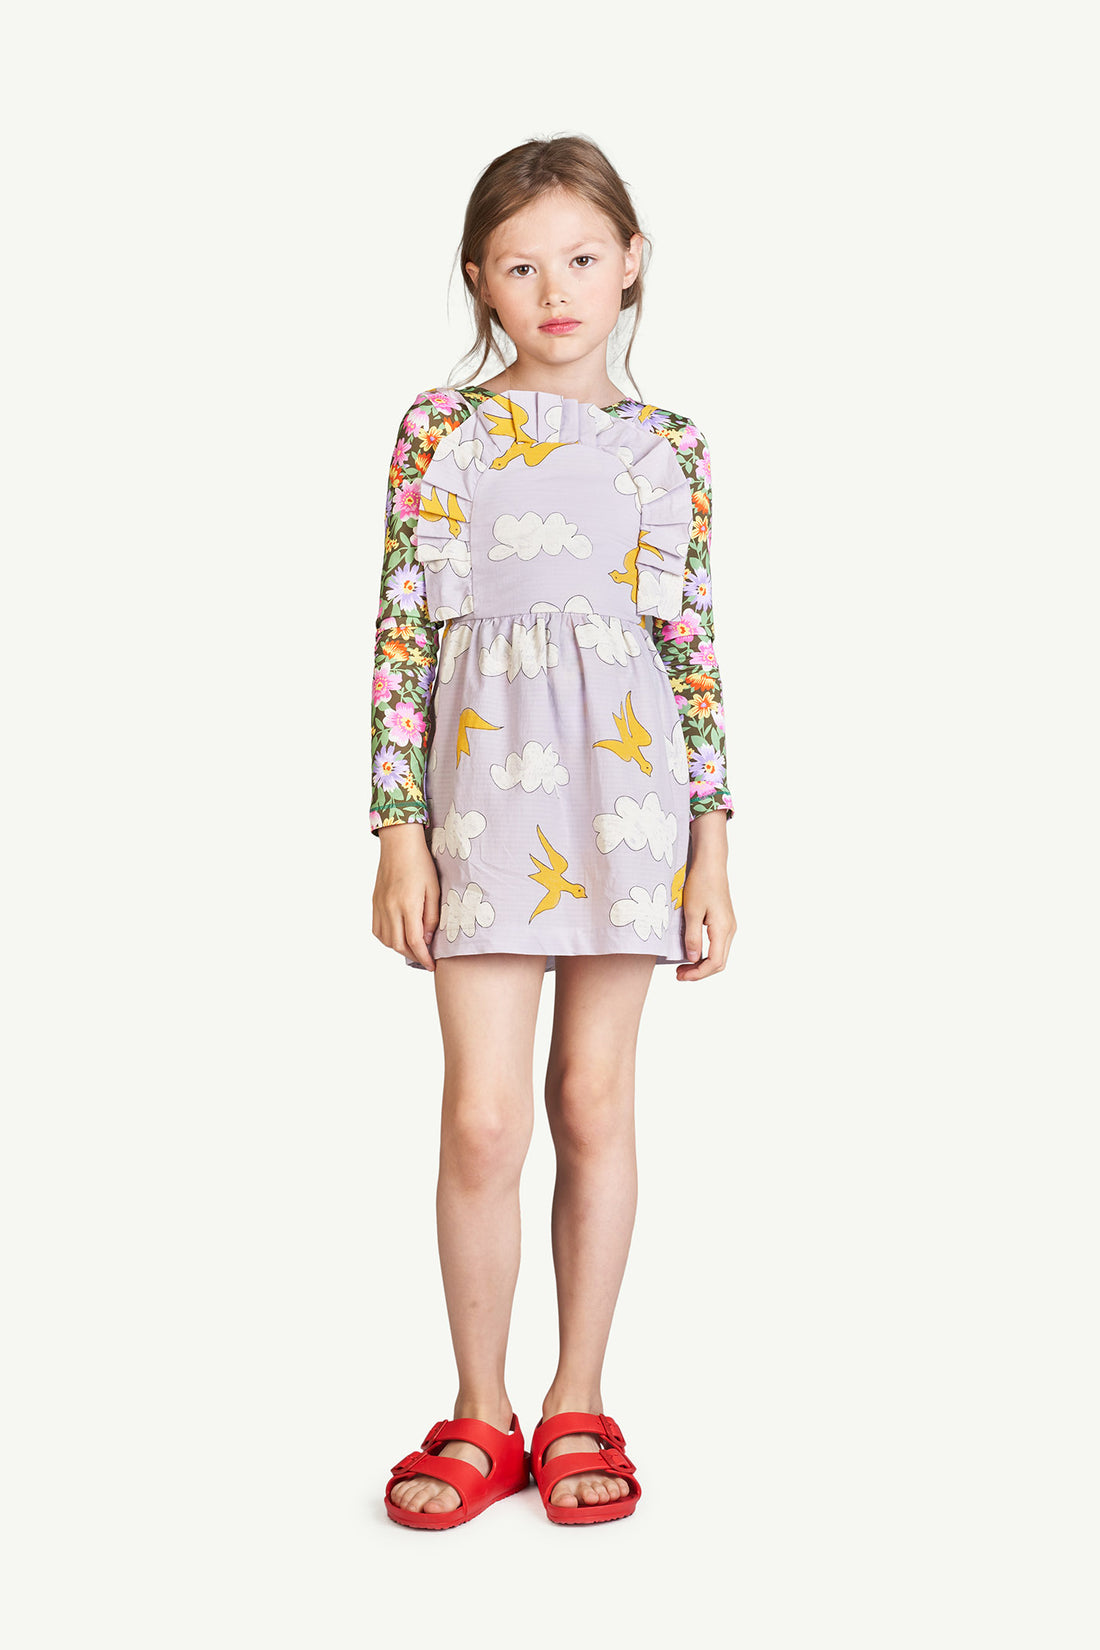 The animals observatory - dragonfly kids dress - lavand